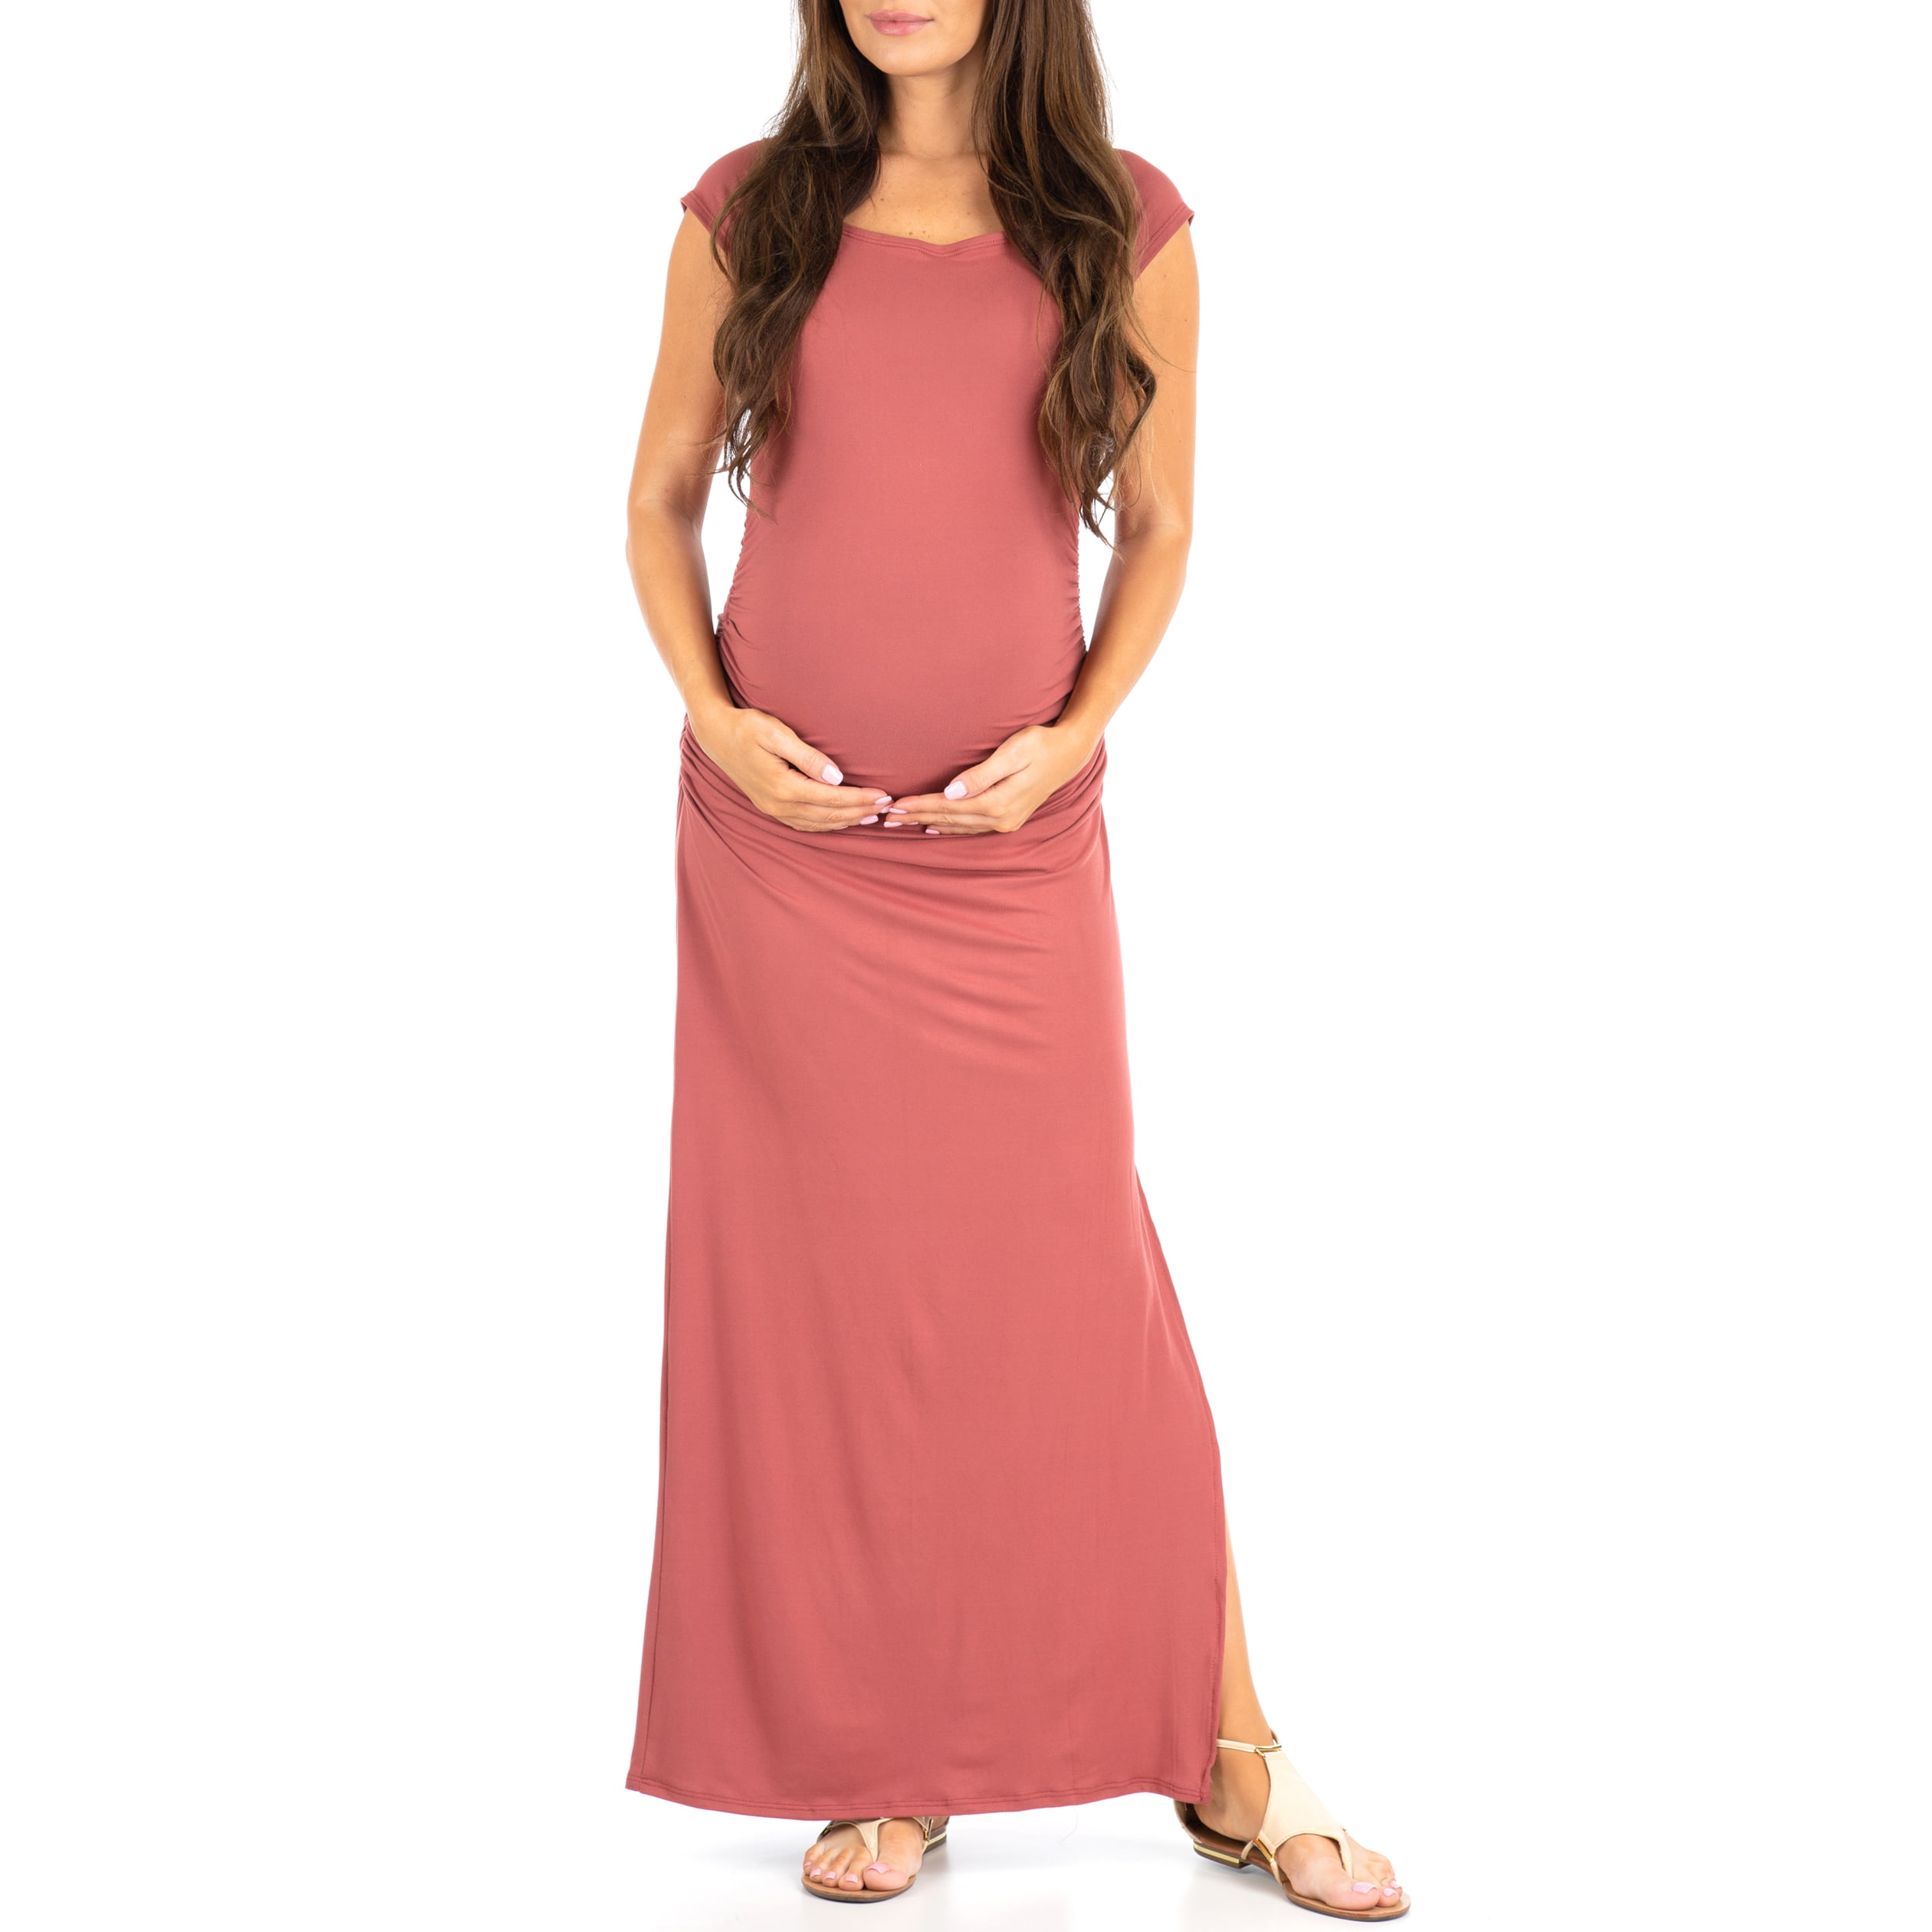 Shortsleeve Ruched Bodycon Maternity Dress with Side Slits 